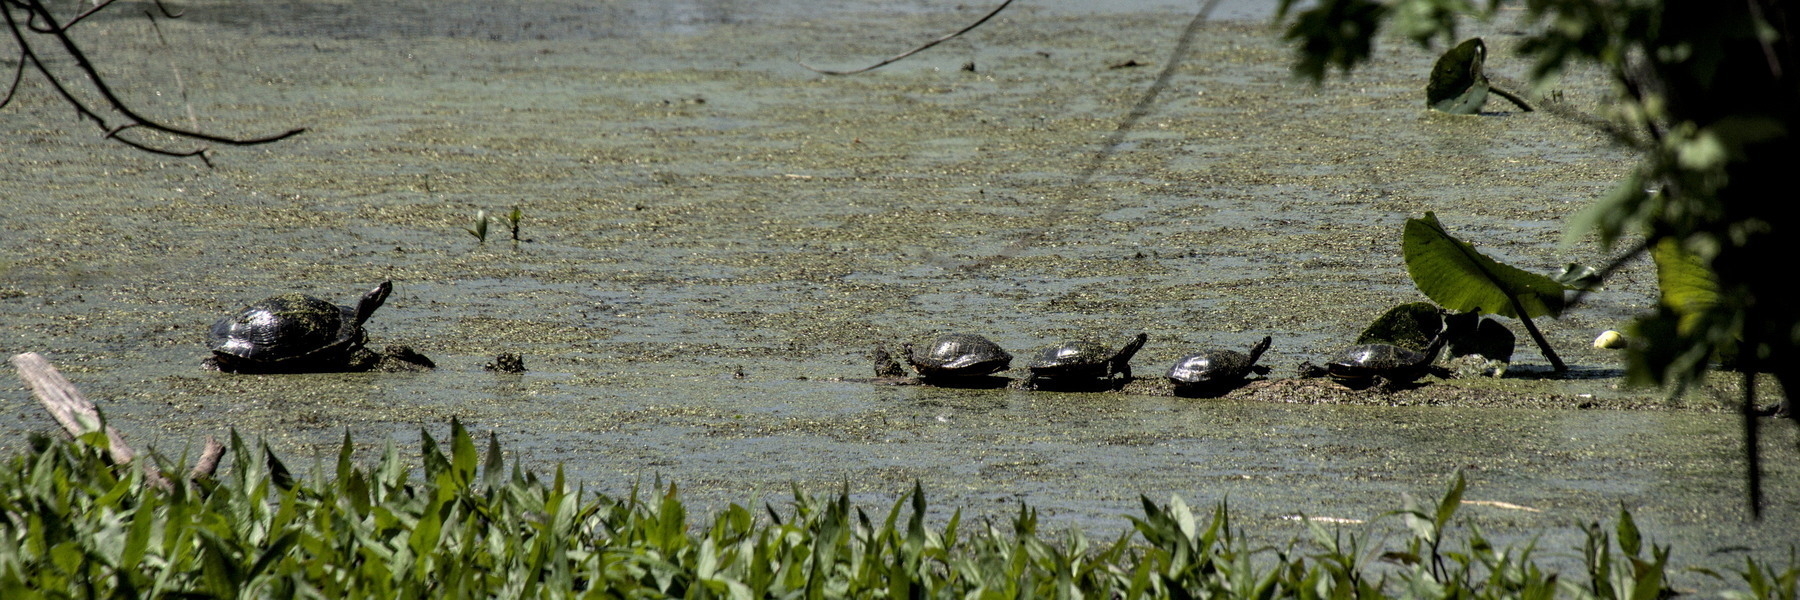 Turtles on a log, one large, four small.